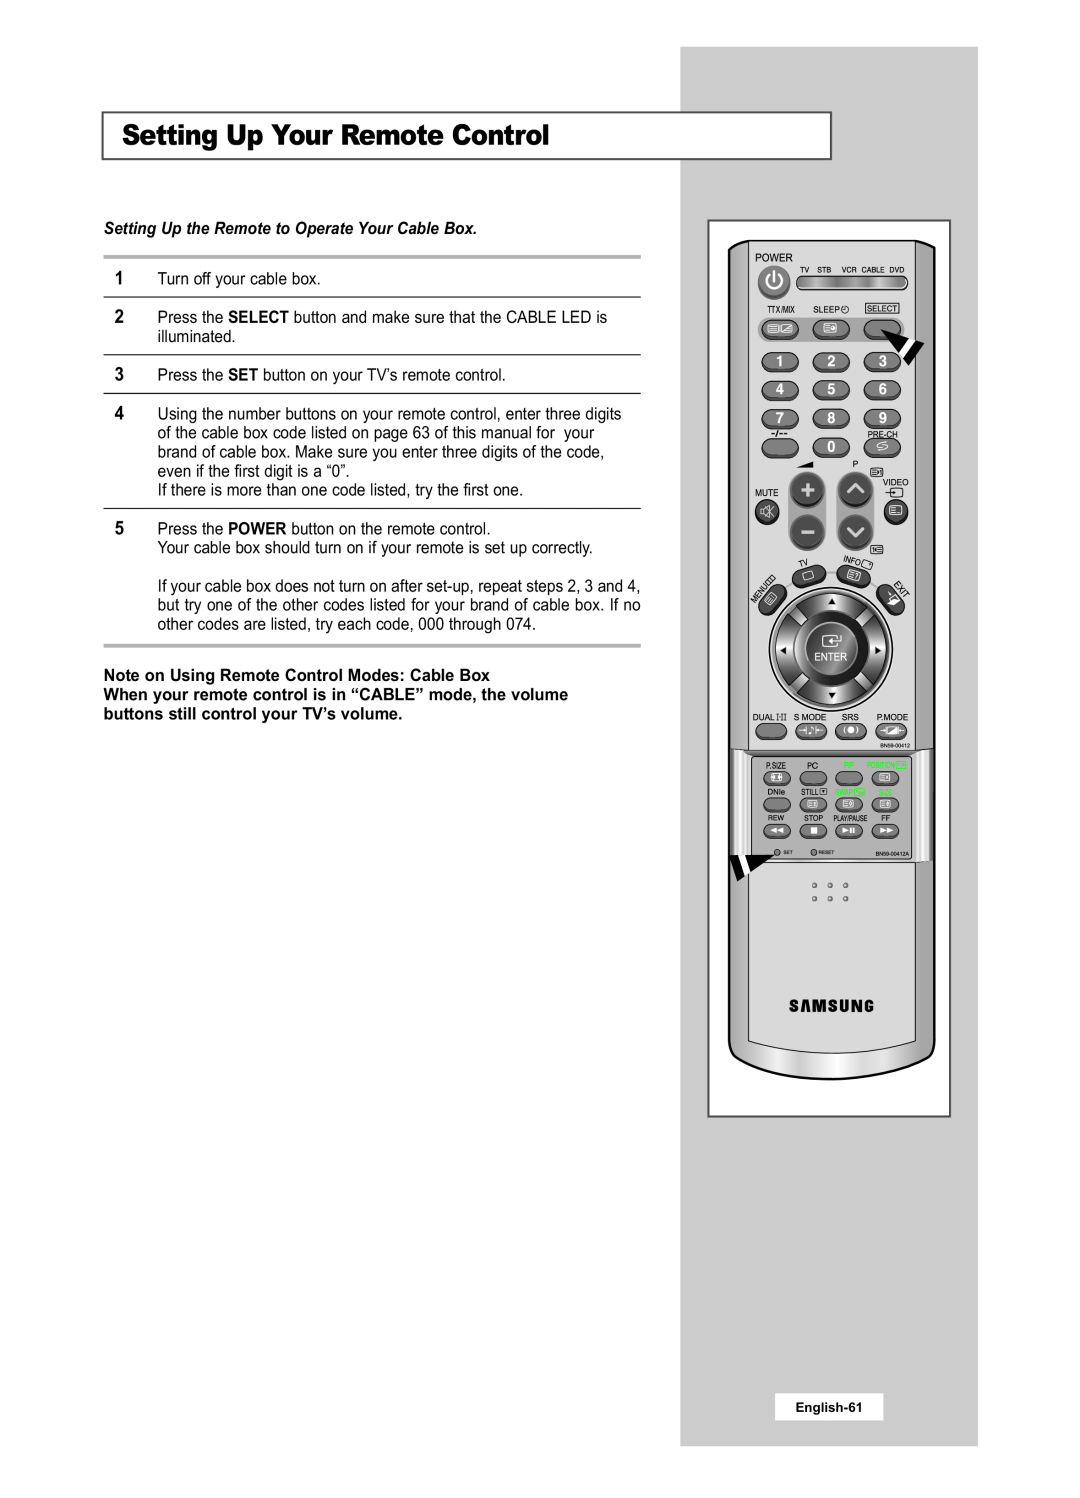 Samsung LA22N21B manual Setting Up the Remote to Operate Your Cable Box, Note on Using Remote Control Modes Cable Box 